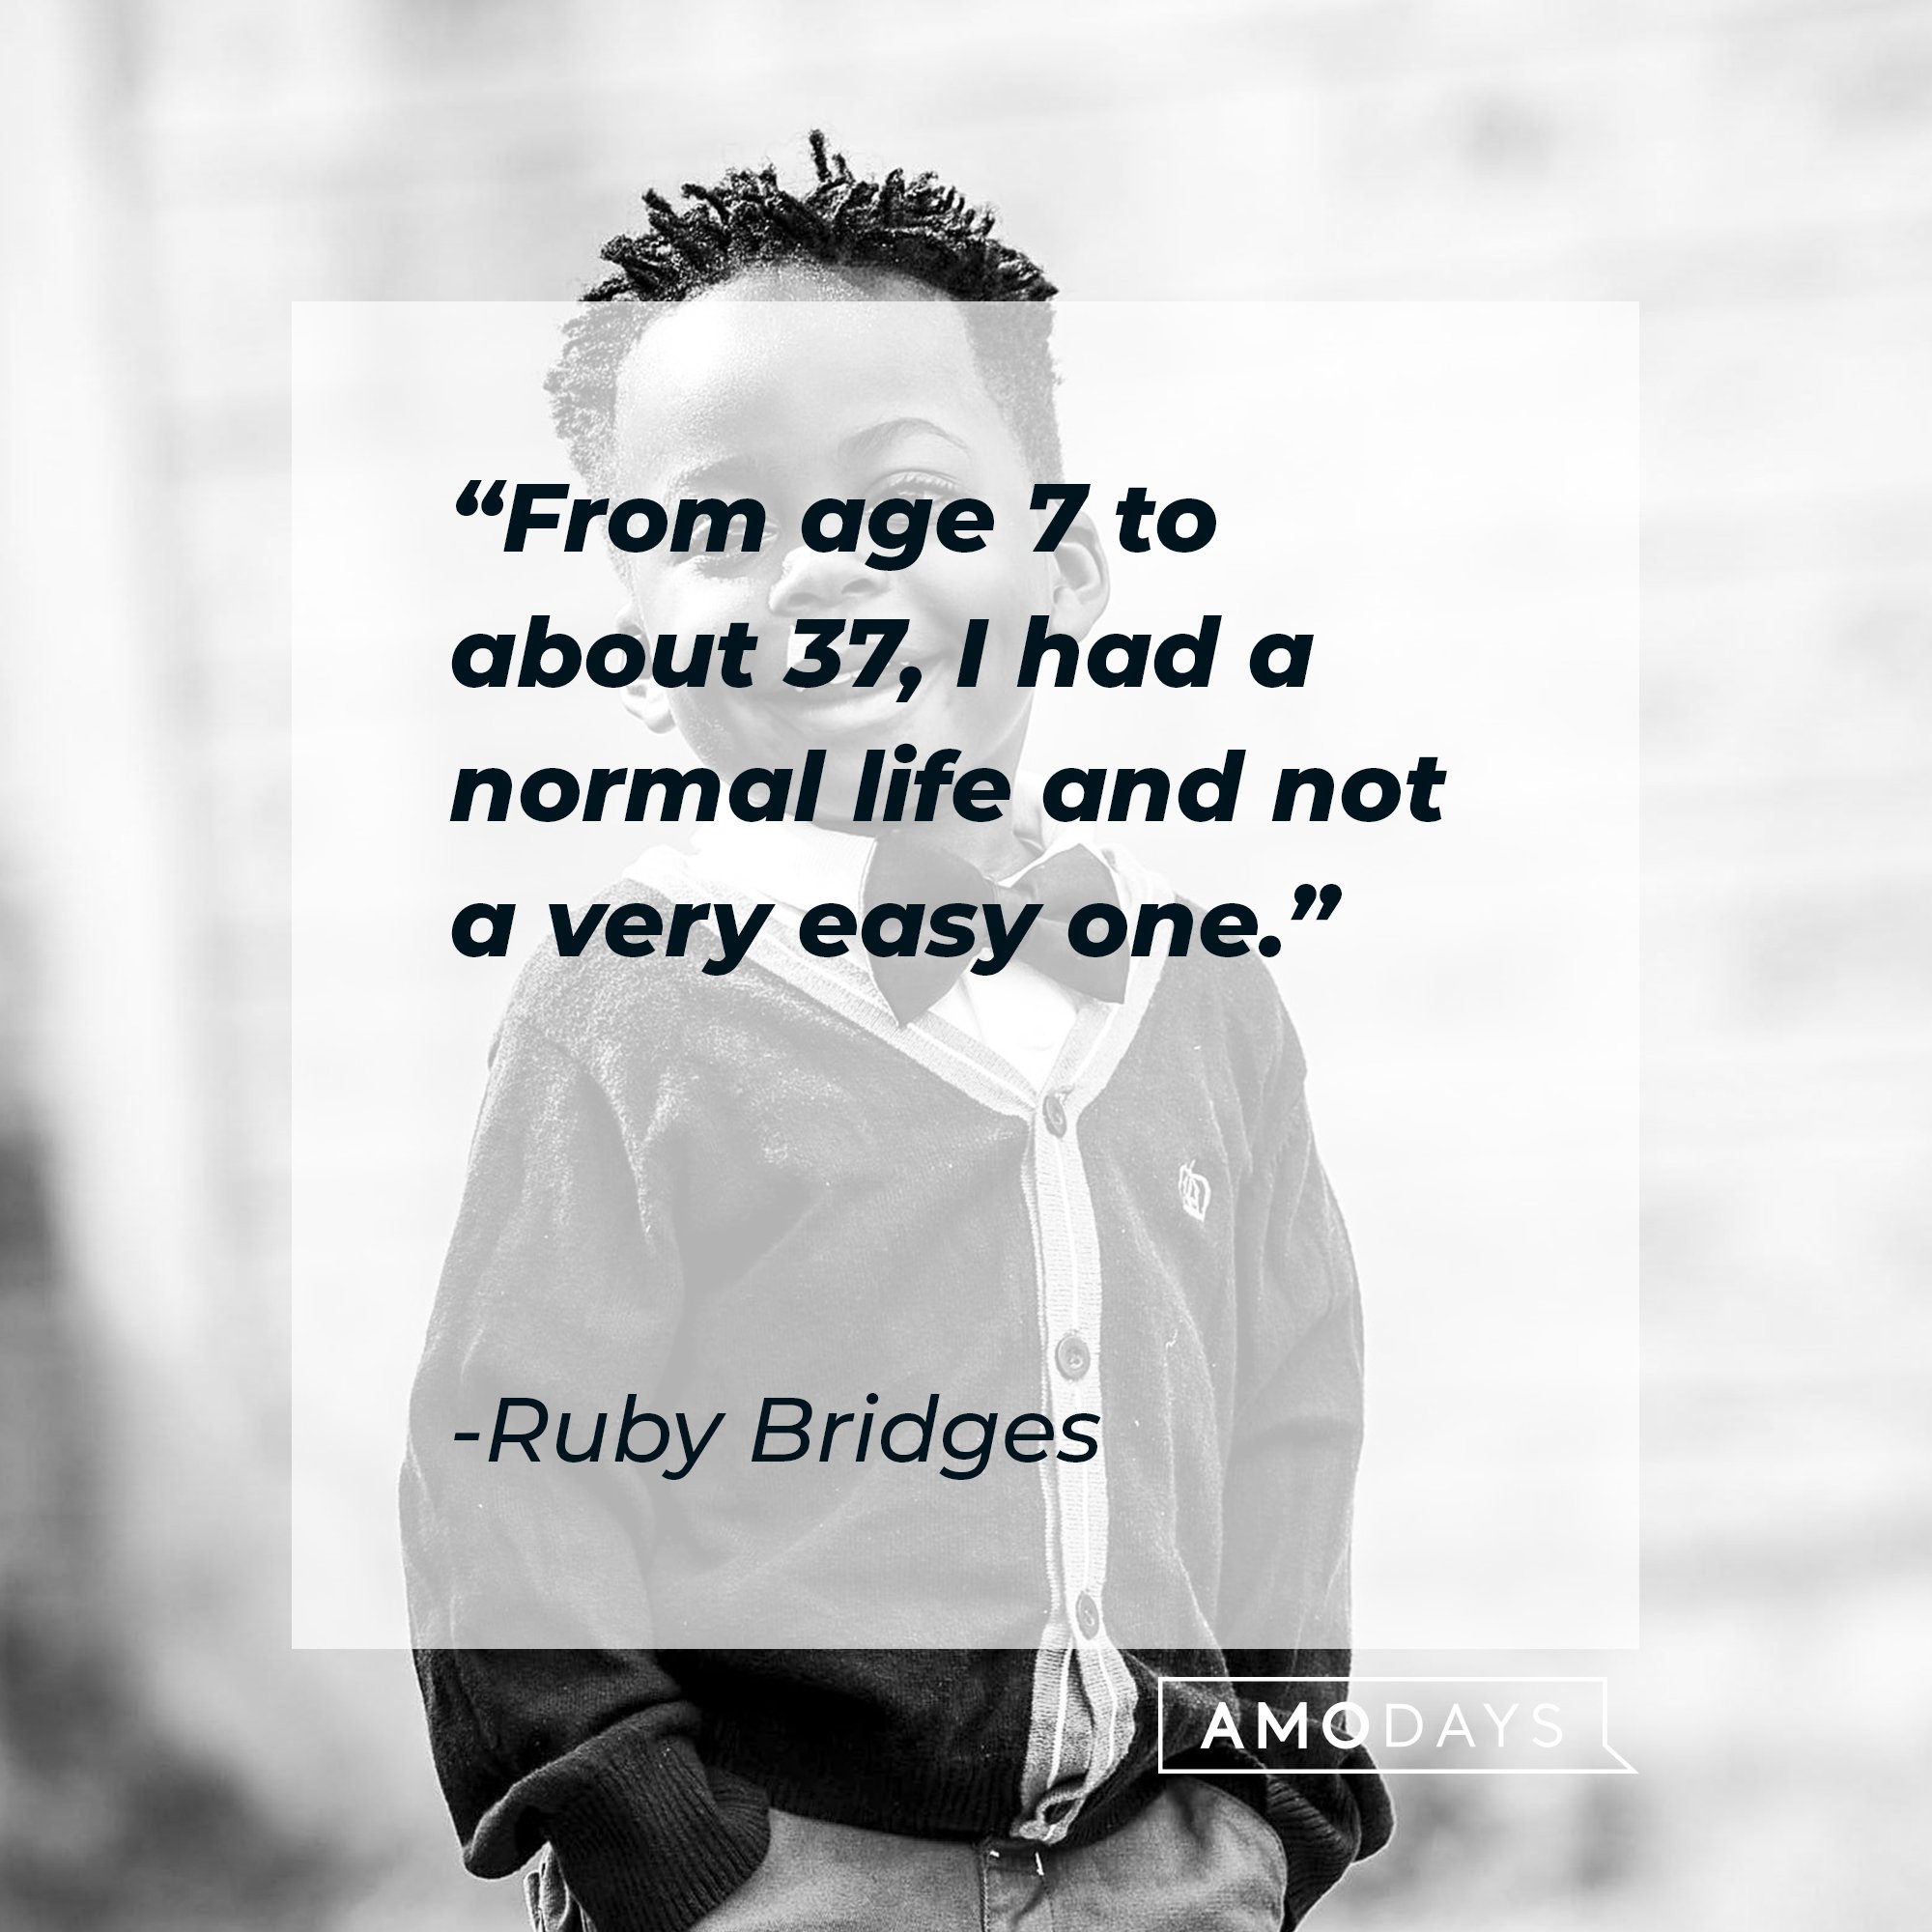 Ruby Bridges’ quote: "From age 7 to about 37, I had a normal life and not a very easy one." | Image: AmoDays 